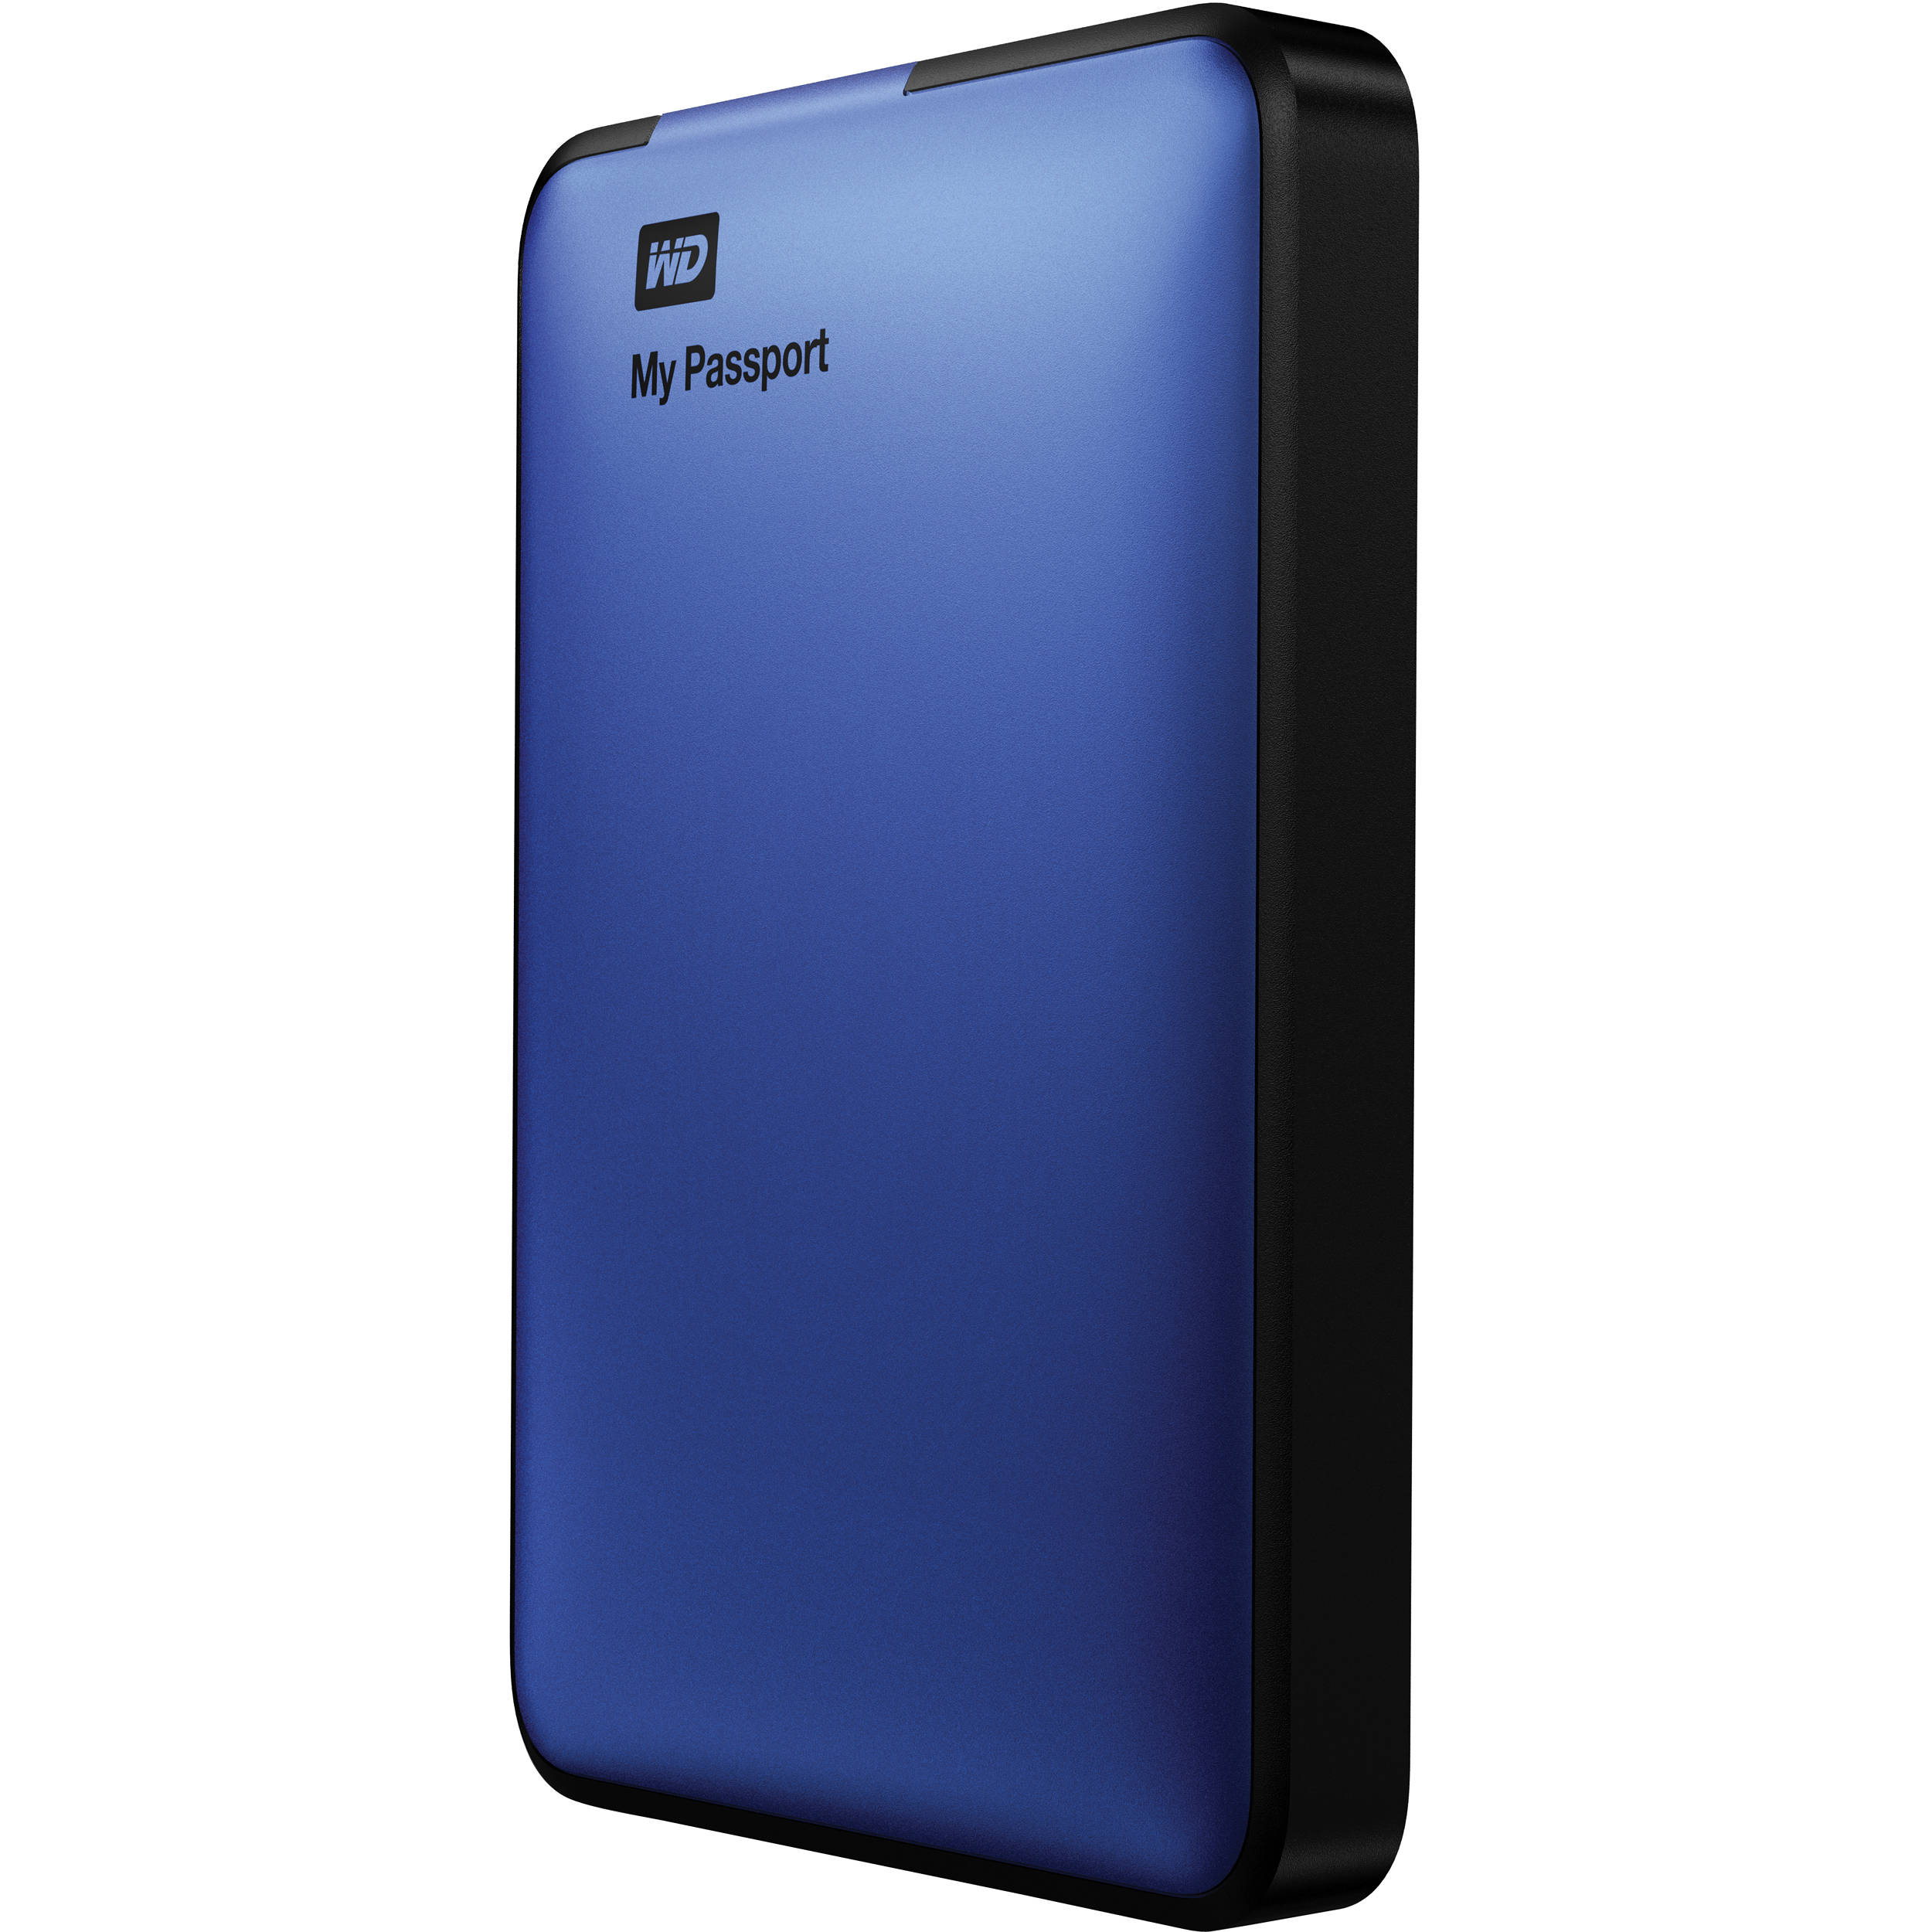 format wd 1tb my passport for windows and mac